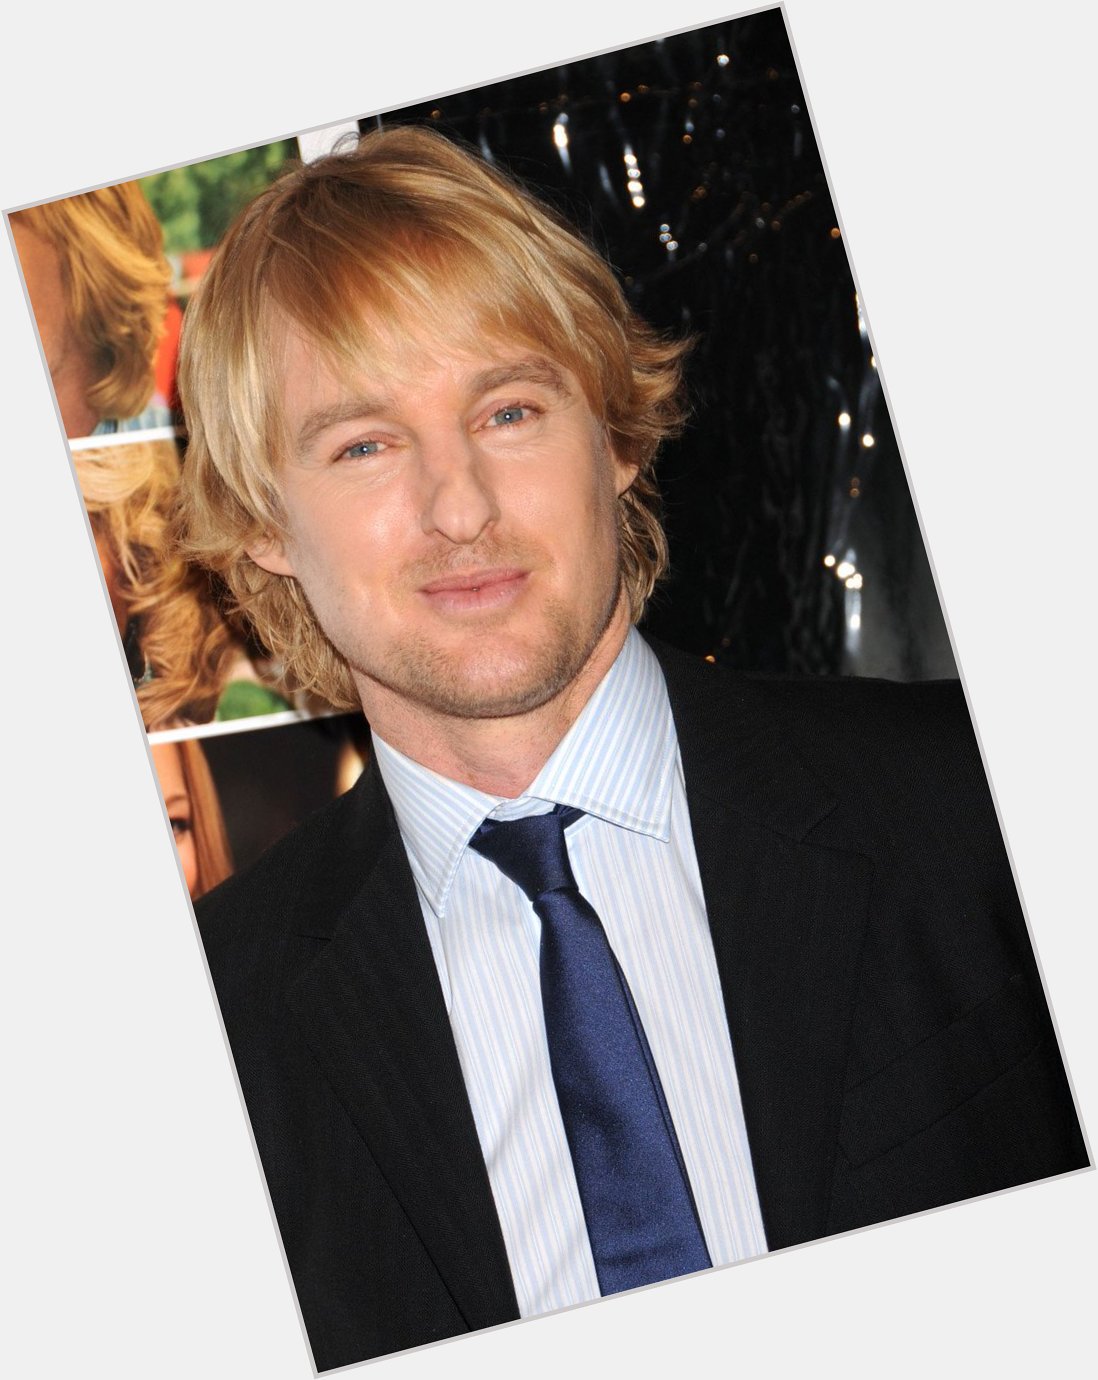  on with wishes Owen Wilson a happy birthday! 